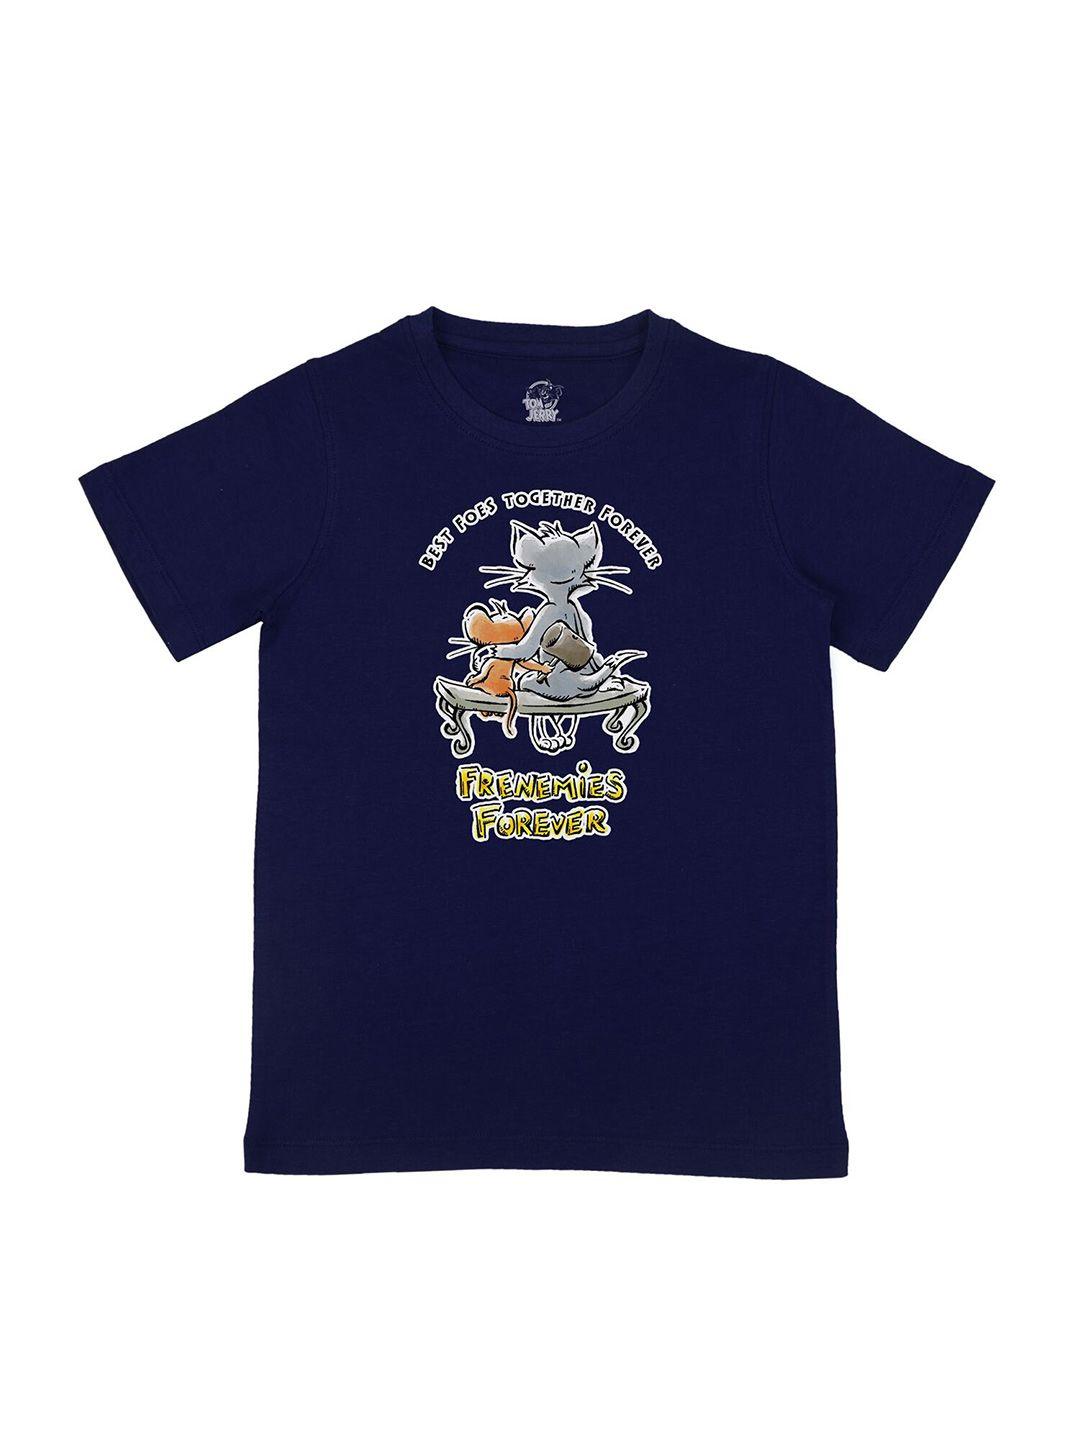 tom & jerry by wear your mind boys navy blue t-shirt